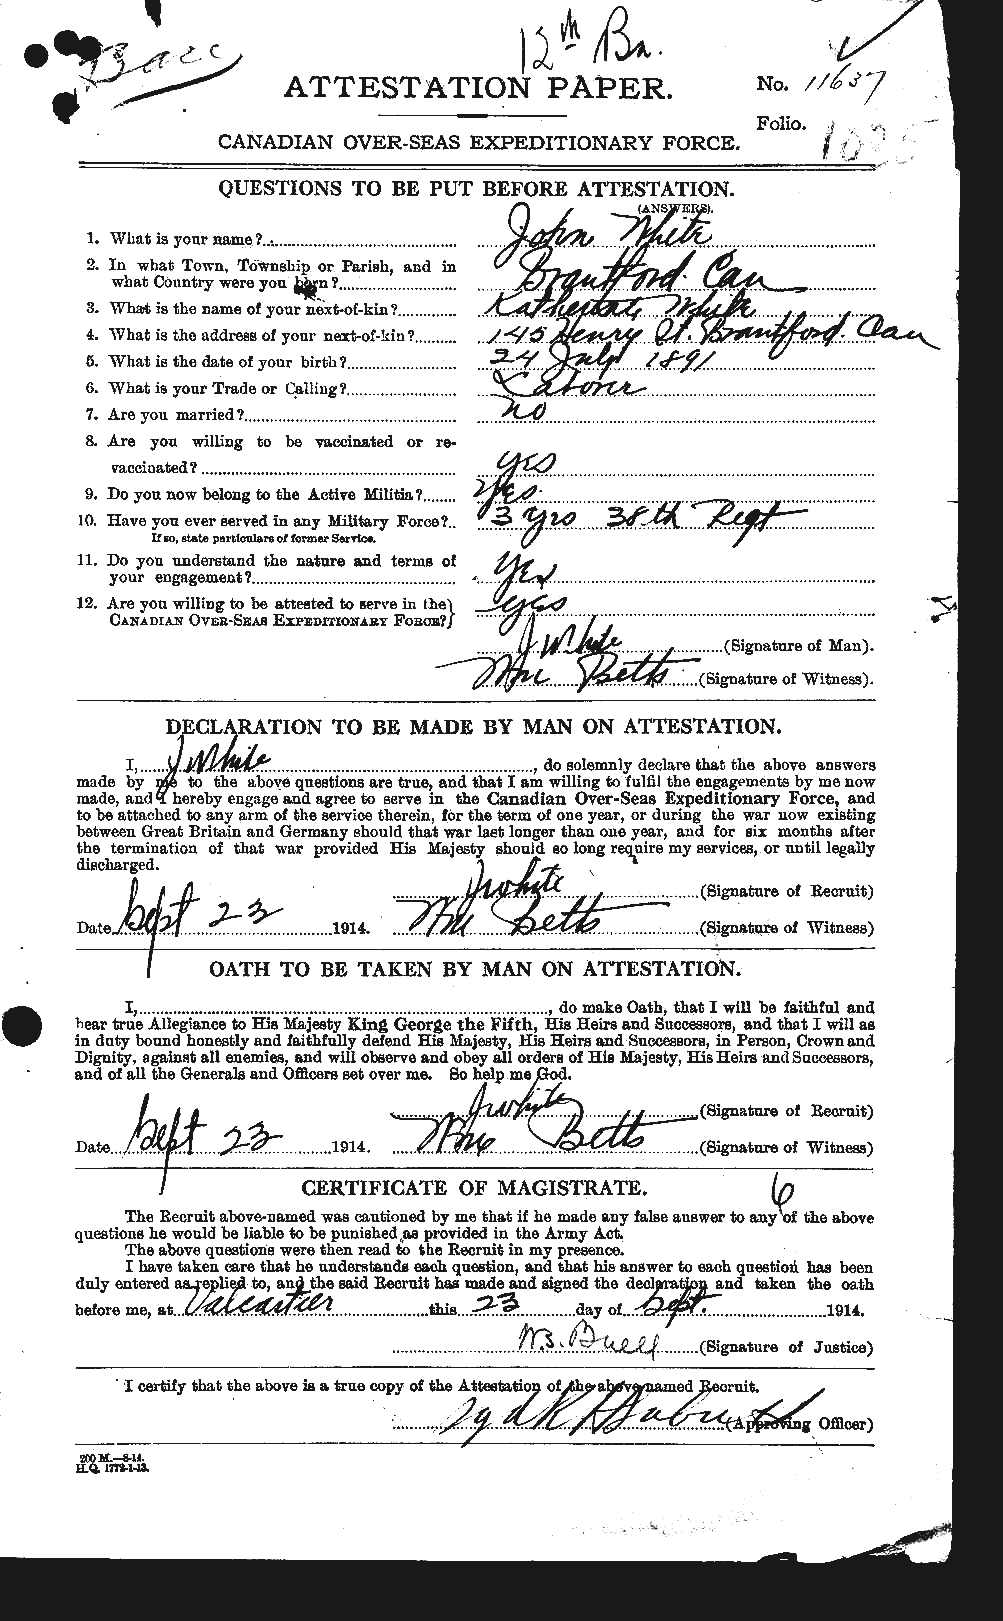 Personnel Records of the First World War - CEF 671504a